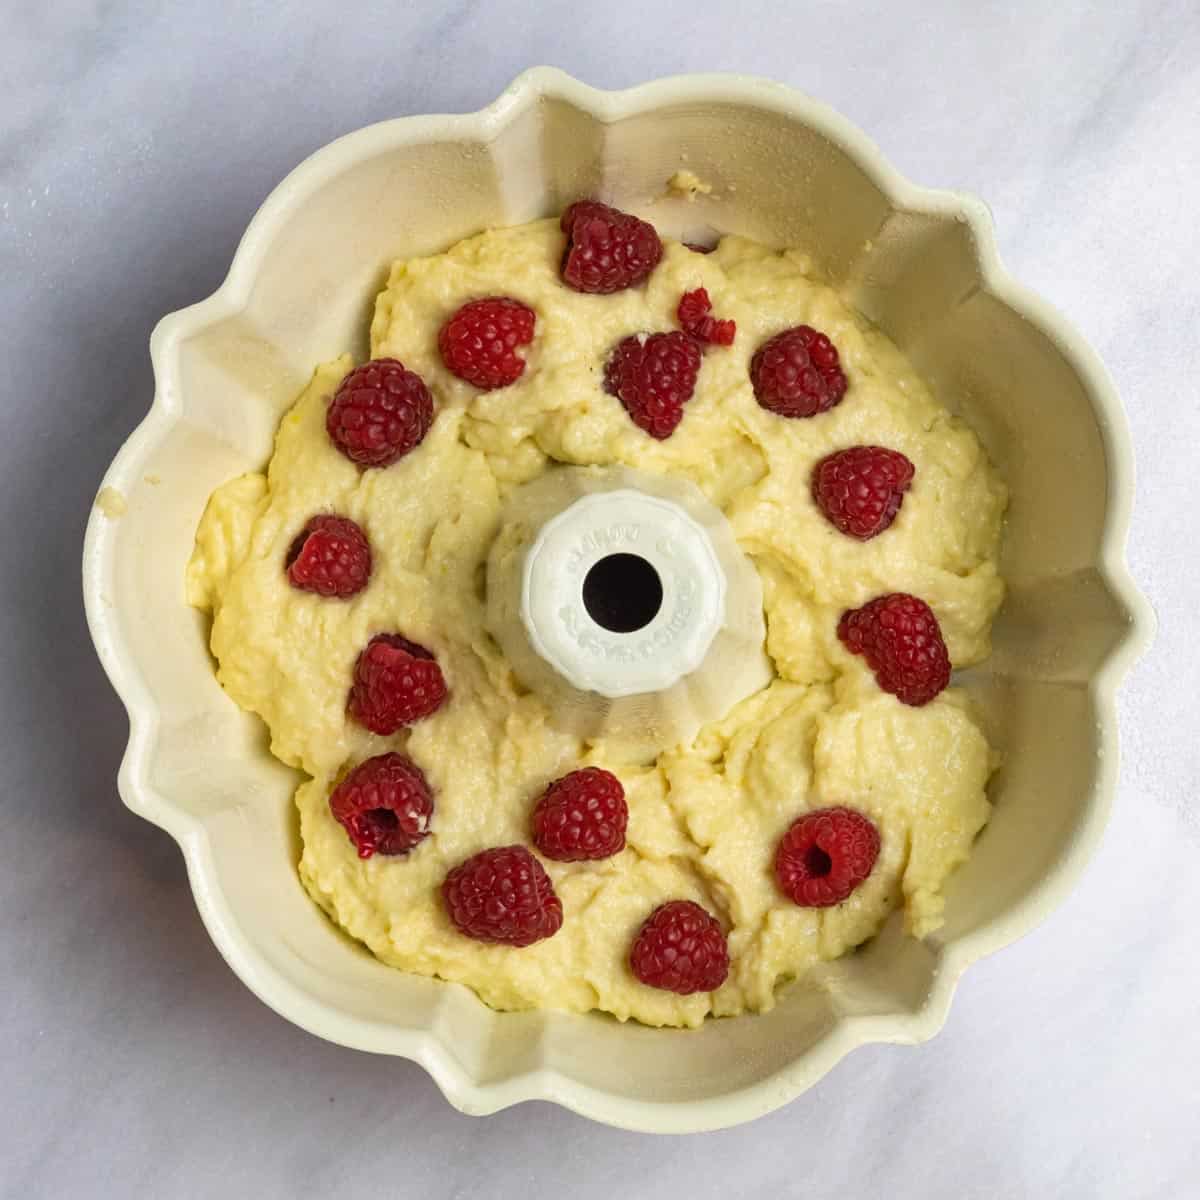 Layer of batter in bundt cake pan with fresh raspberries on to to create middle layer.